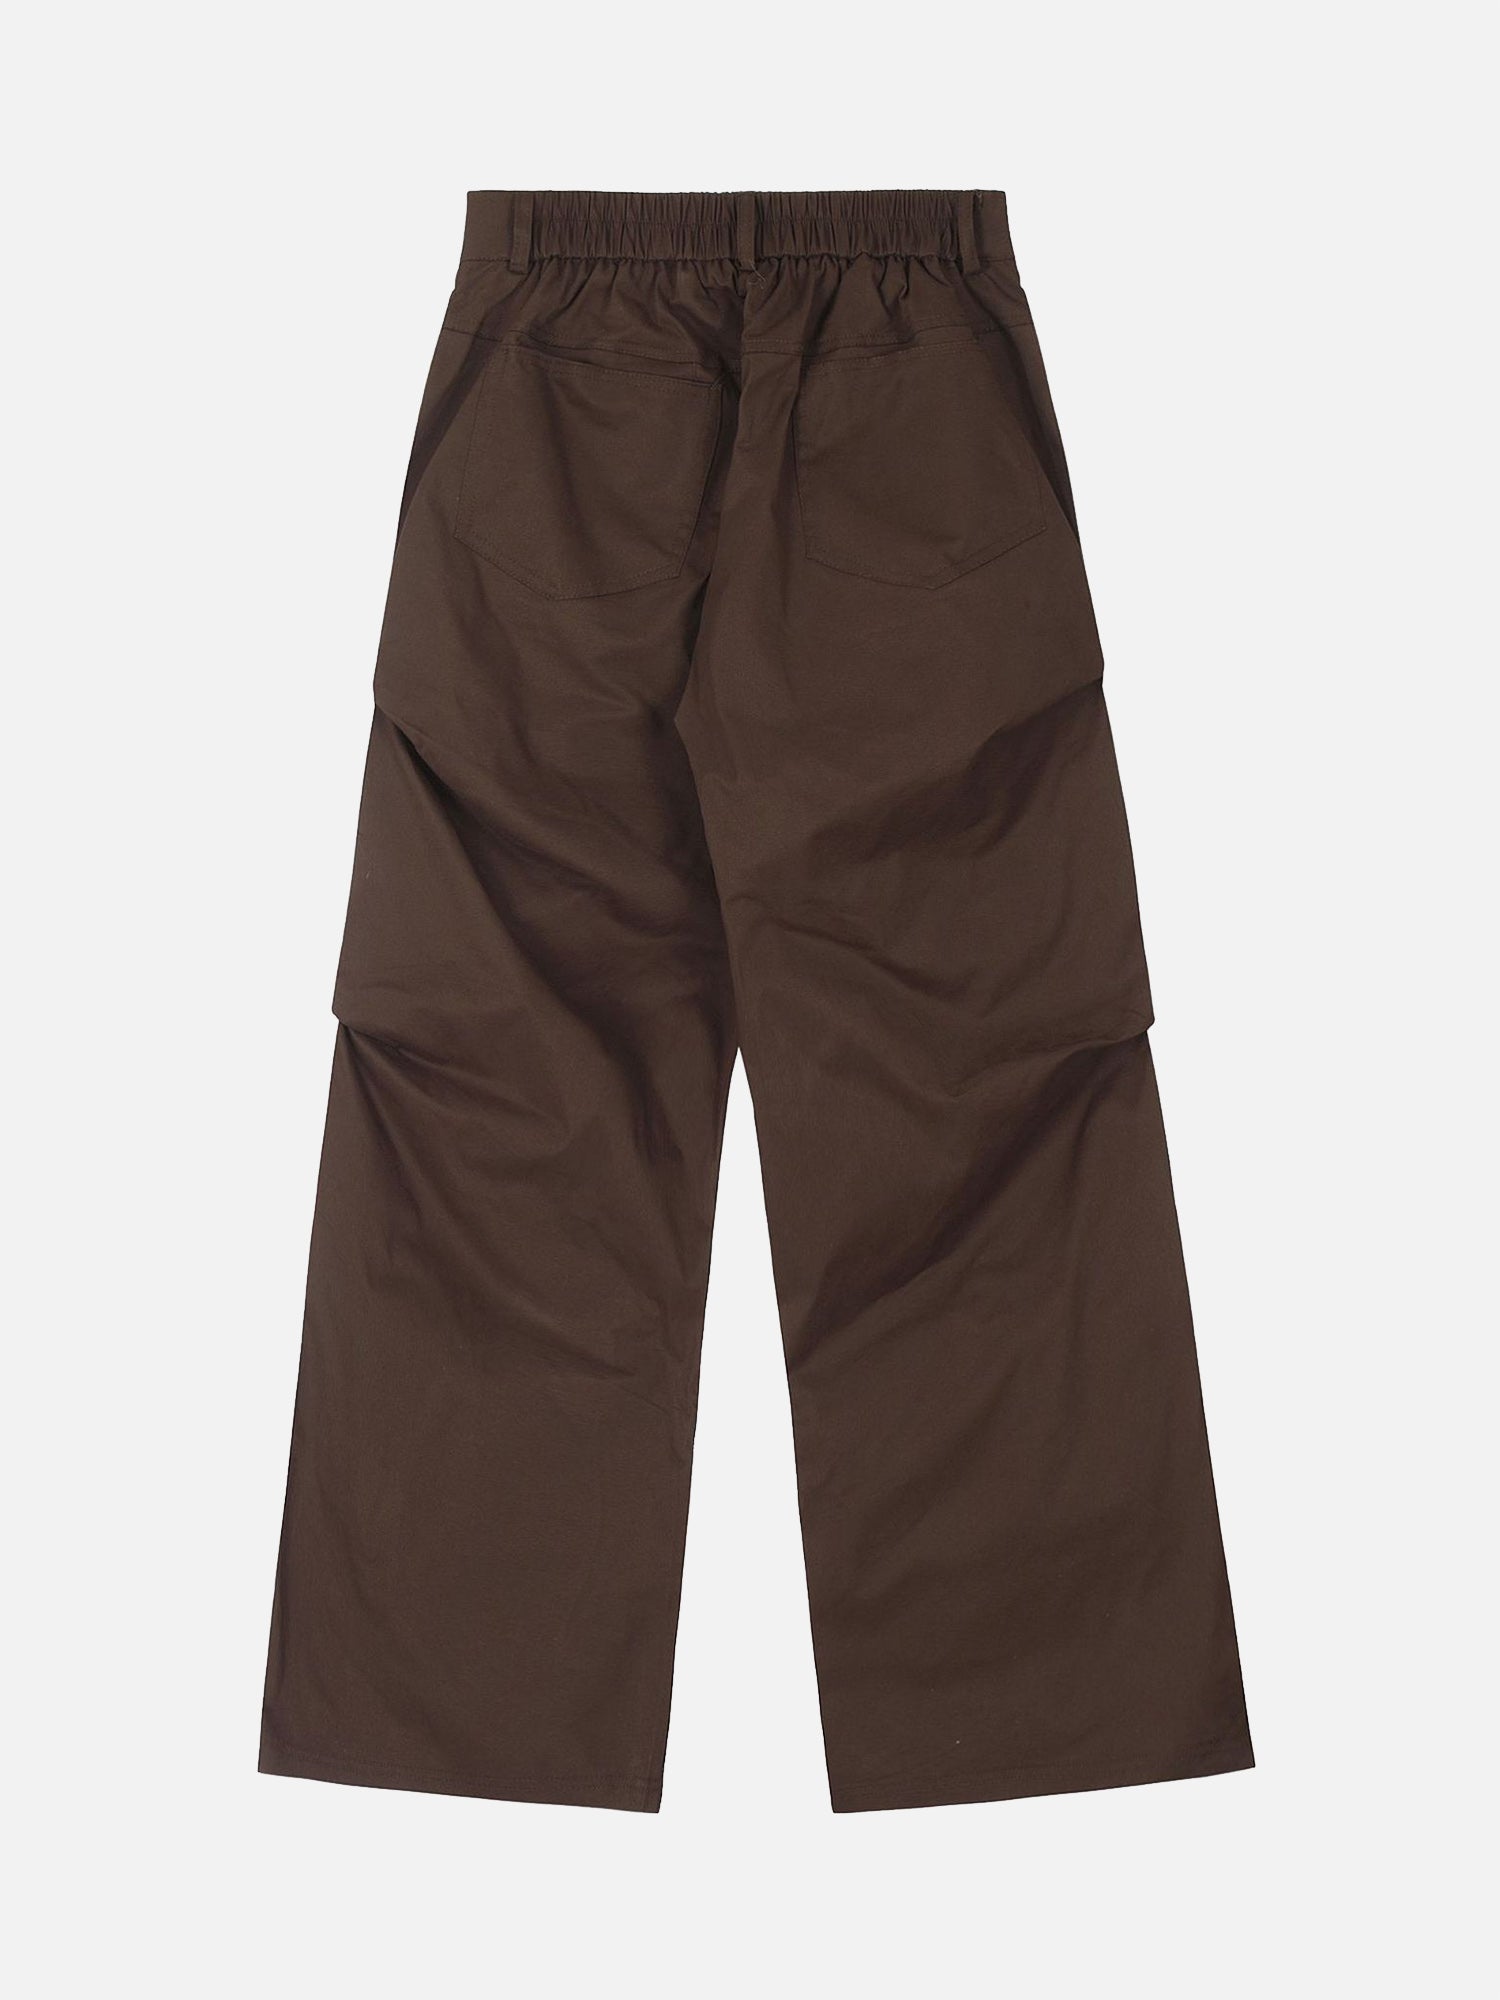 Thesupermade American Street Trend Pleated Versatile Casual Pants